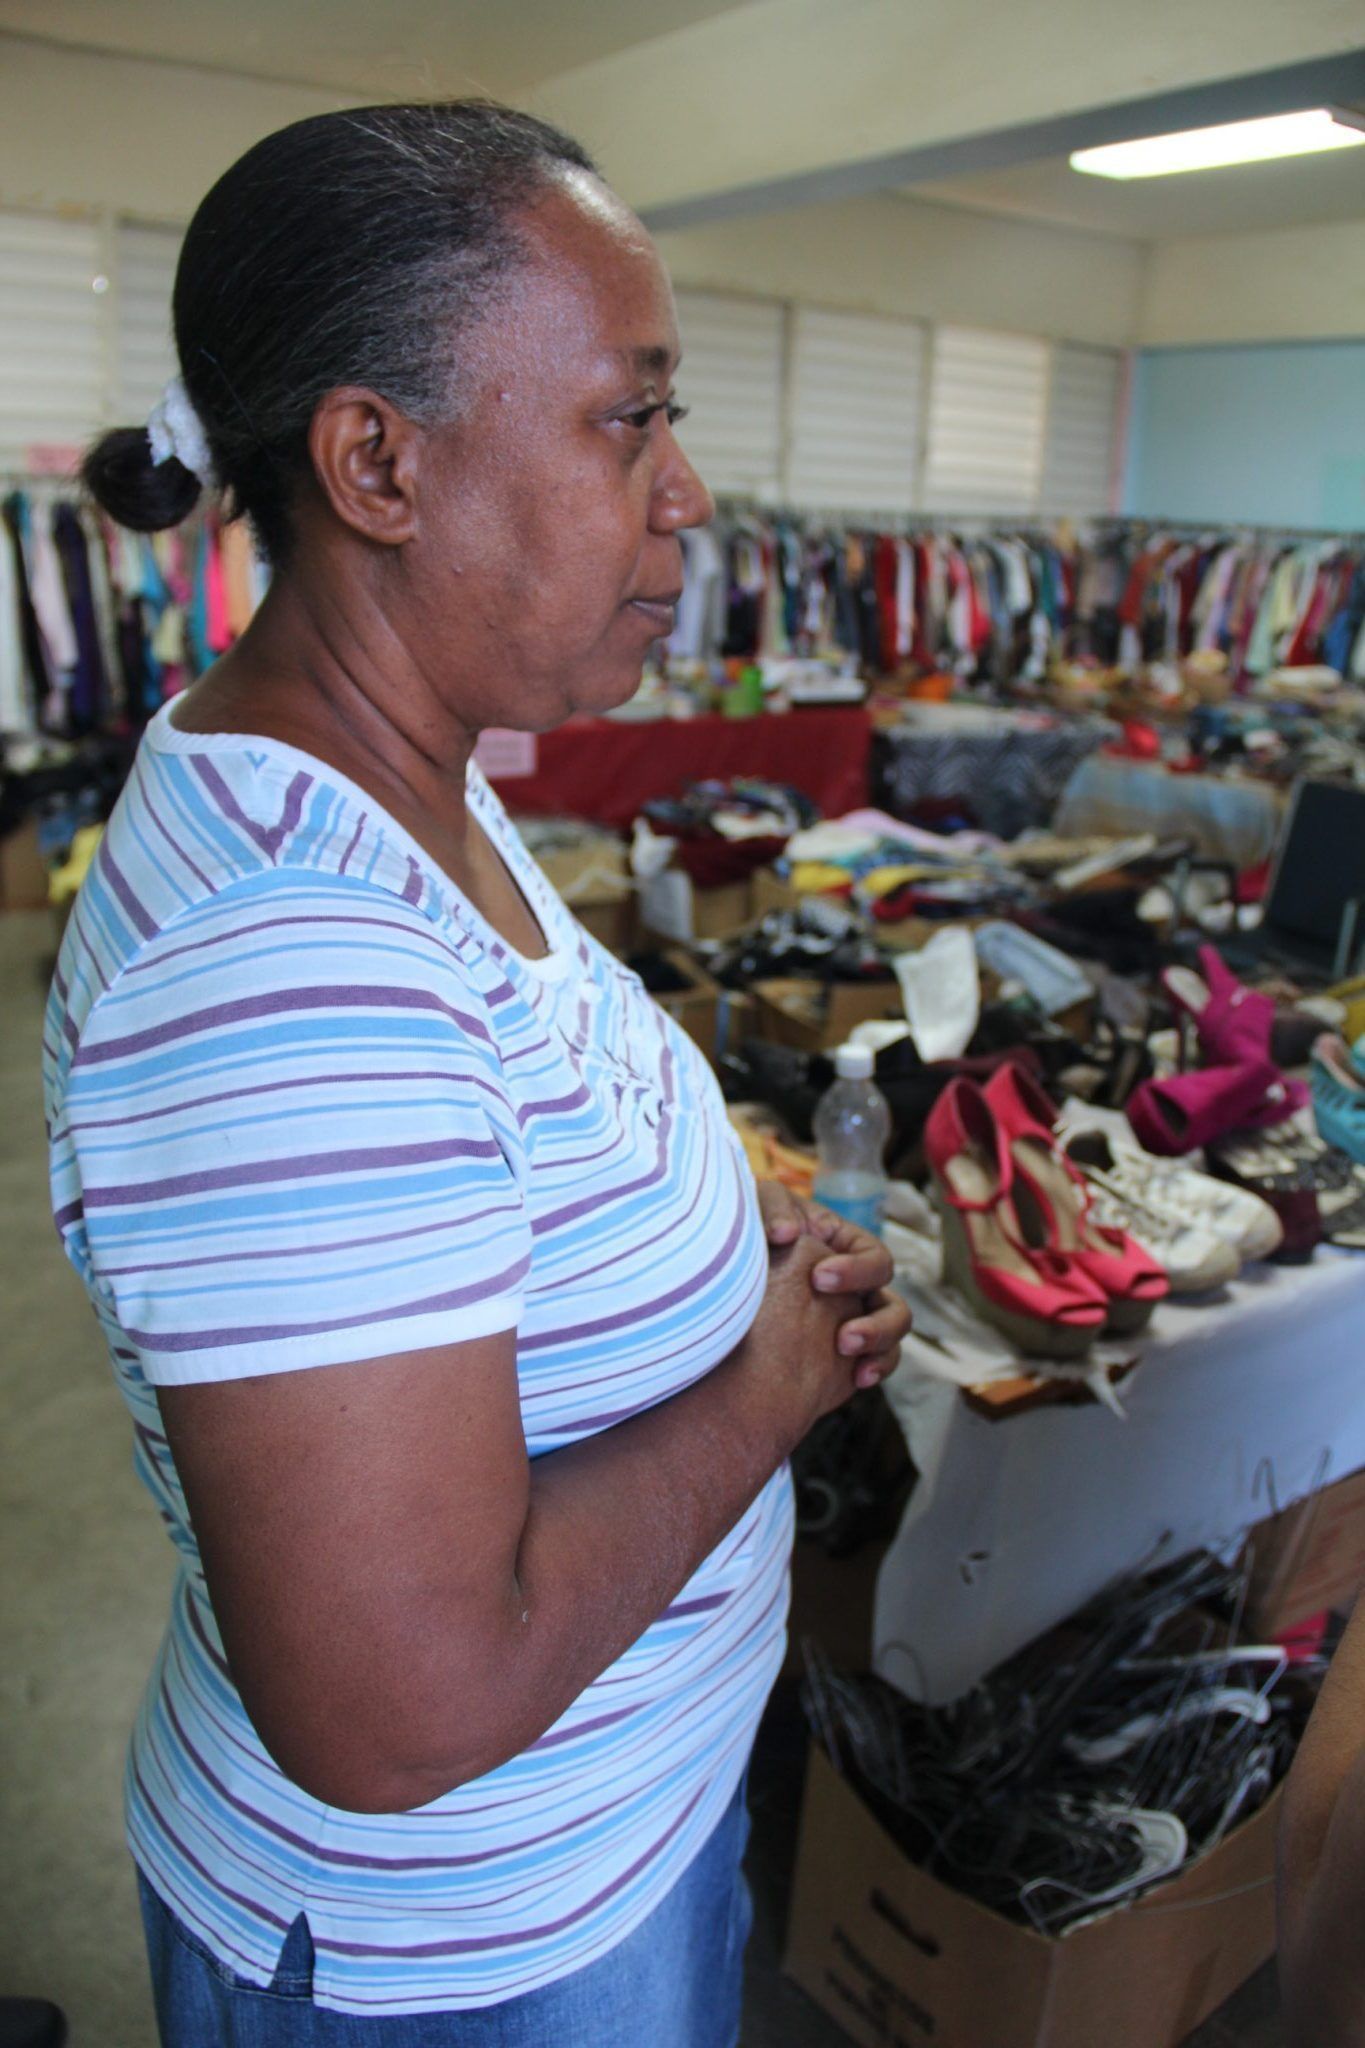 Evelyn Allende in the clothing center at the Parcelas Suárez community center. Image by Kari Lydersen. Puerto Rico, 2019.